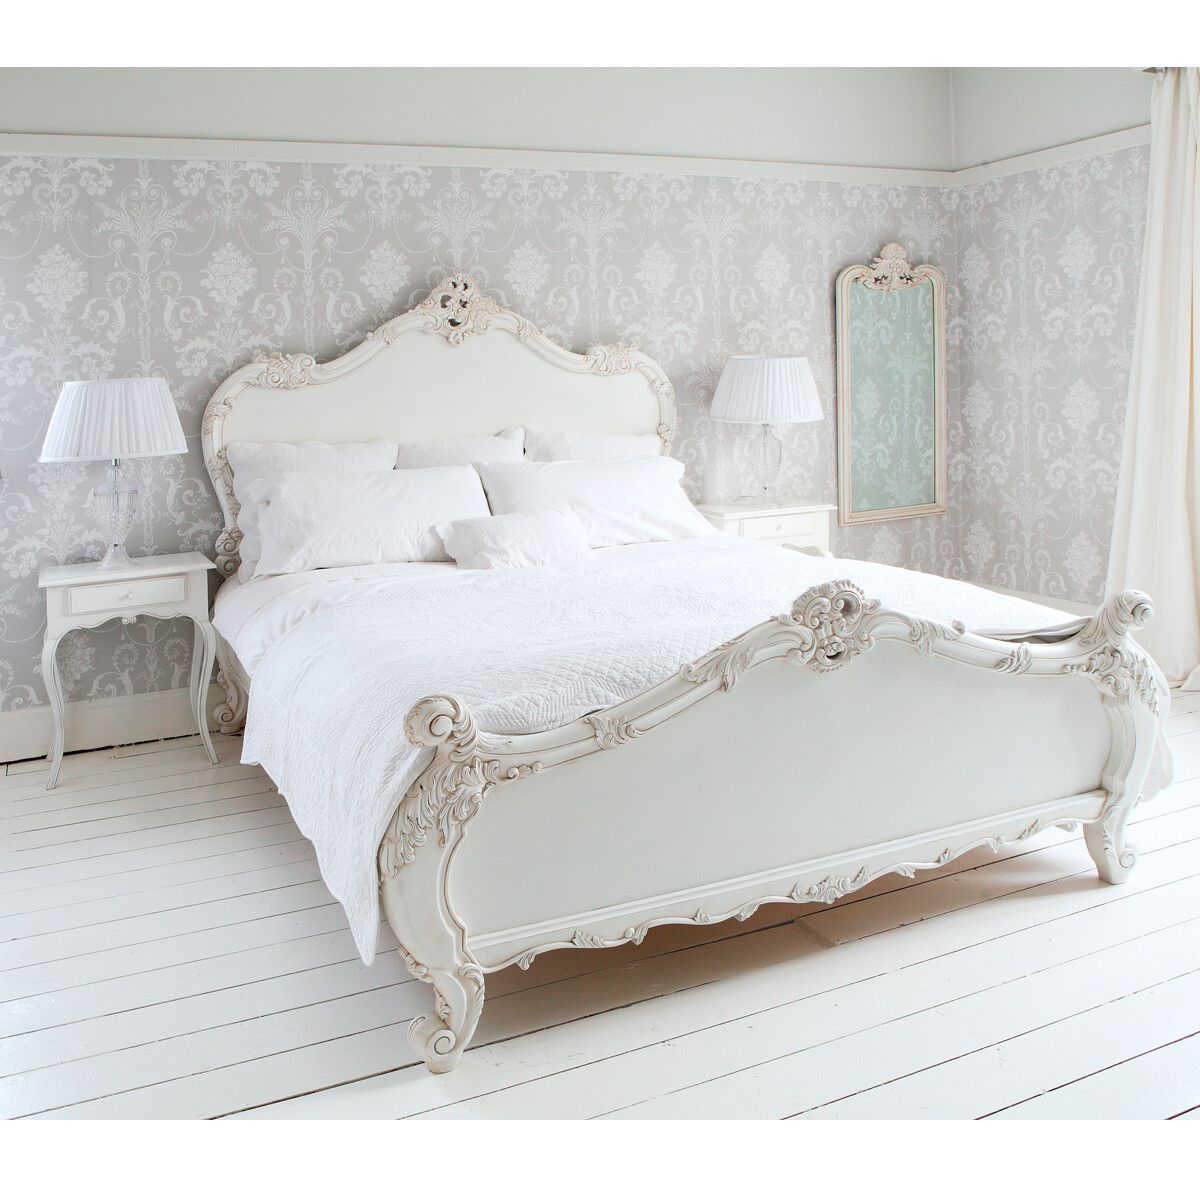 French beds - Provencal Sassy White -The French Bedroom Company - www.homeworlddesign.com